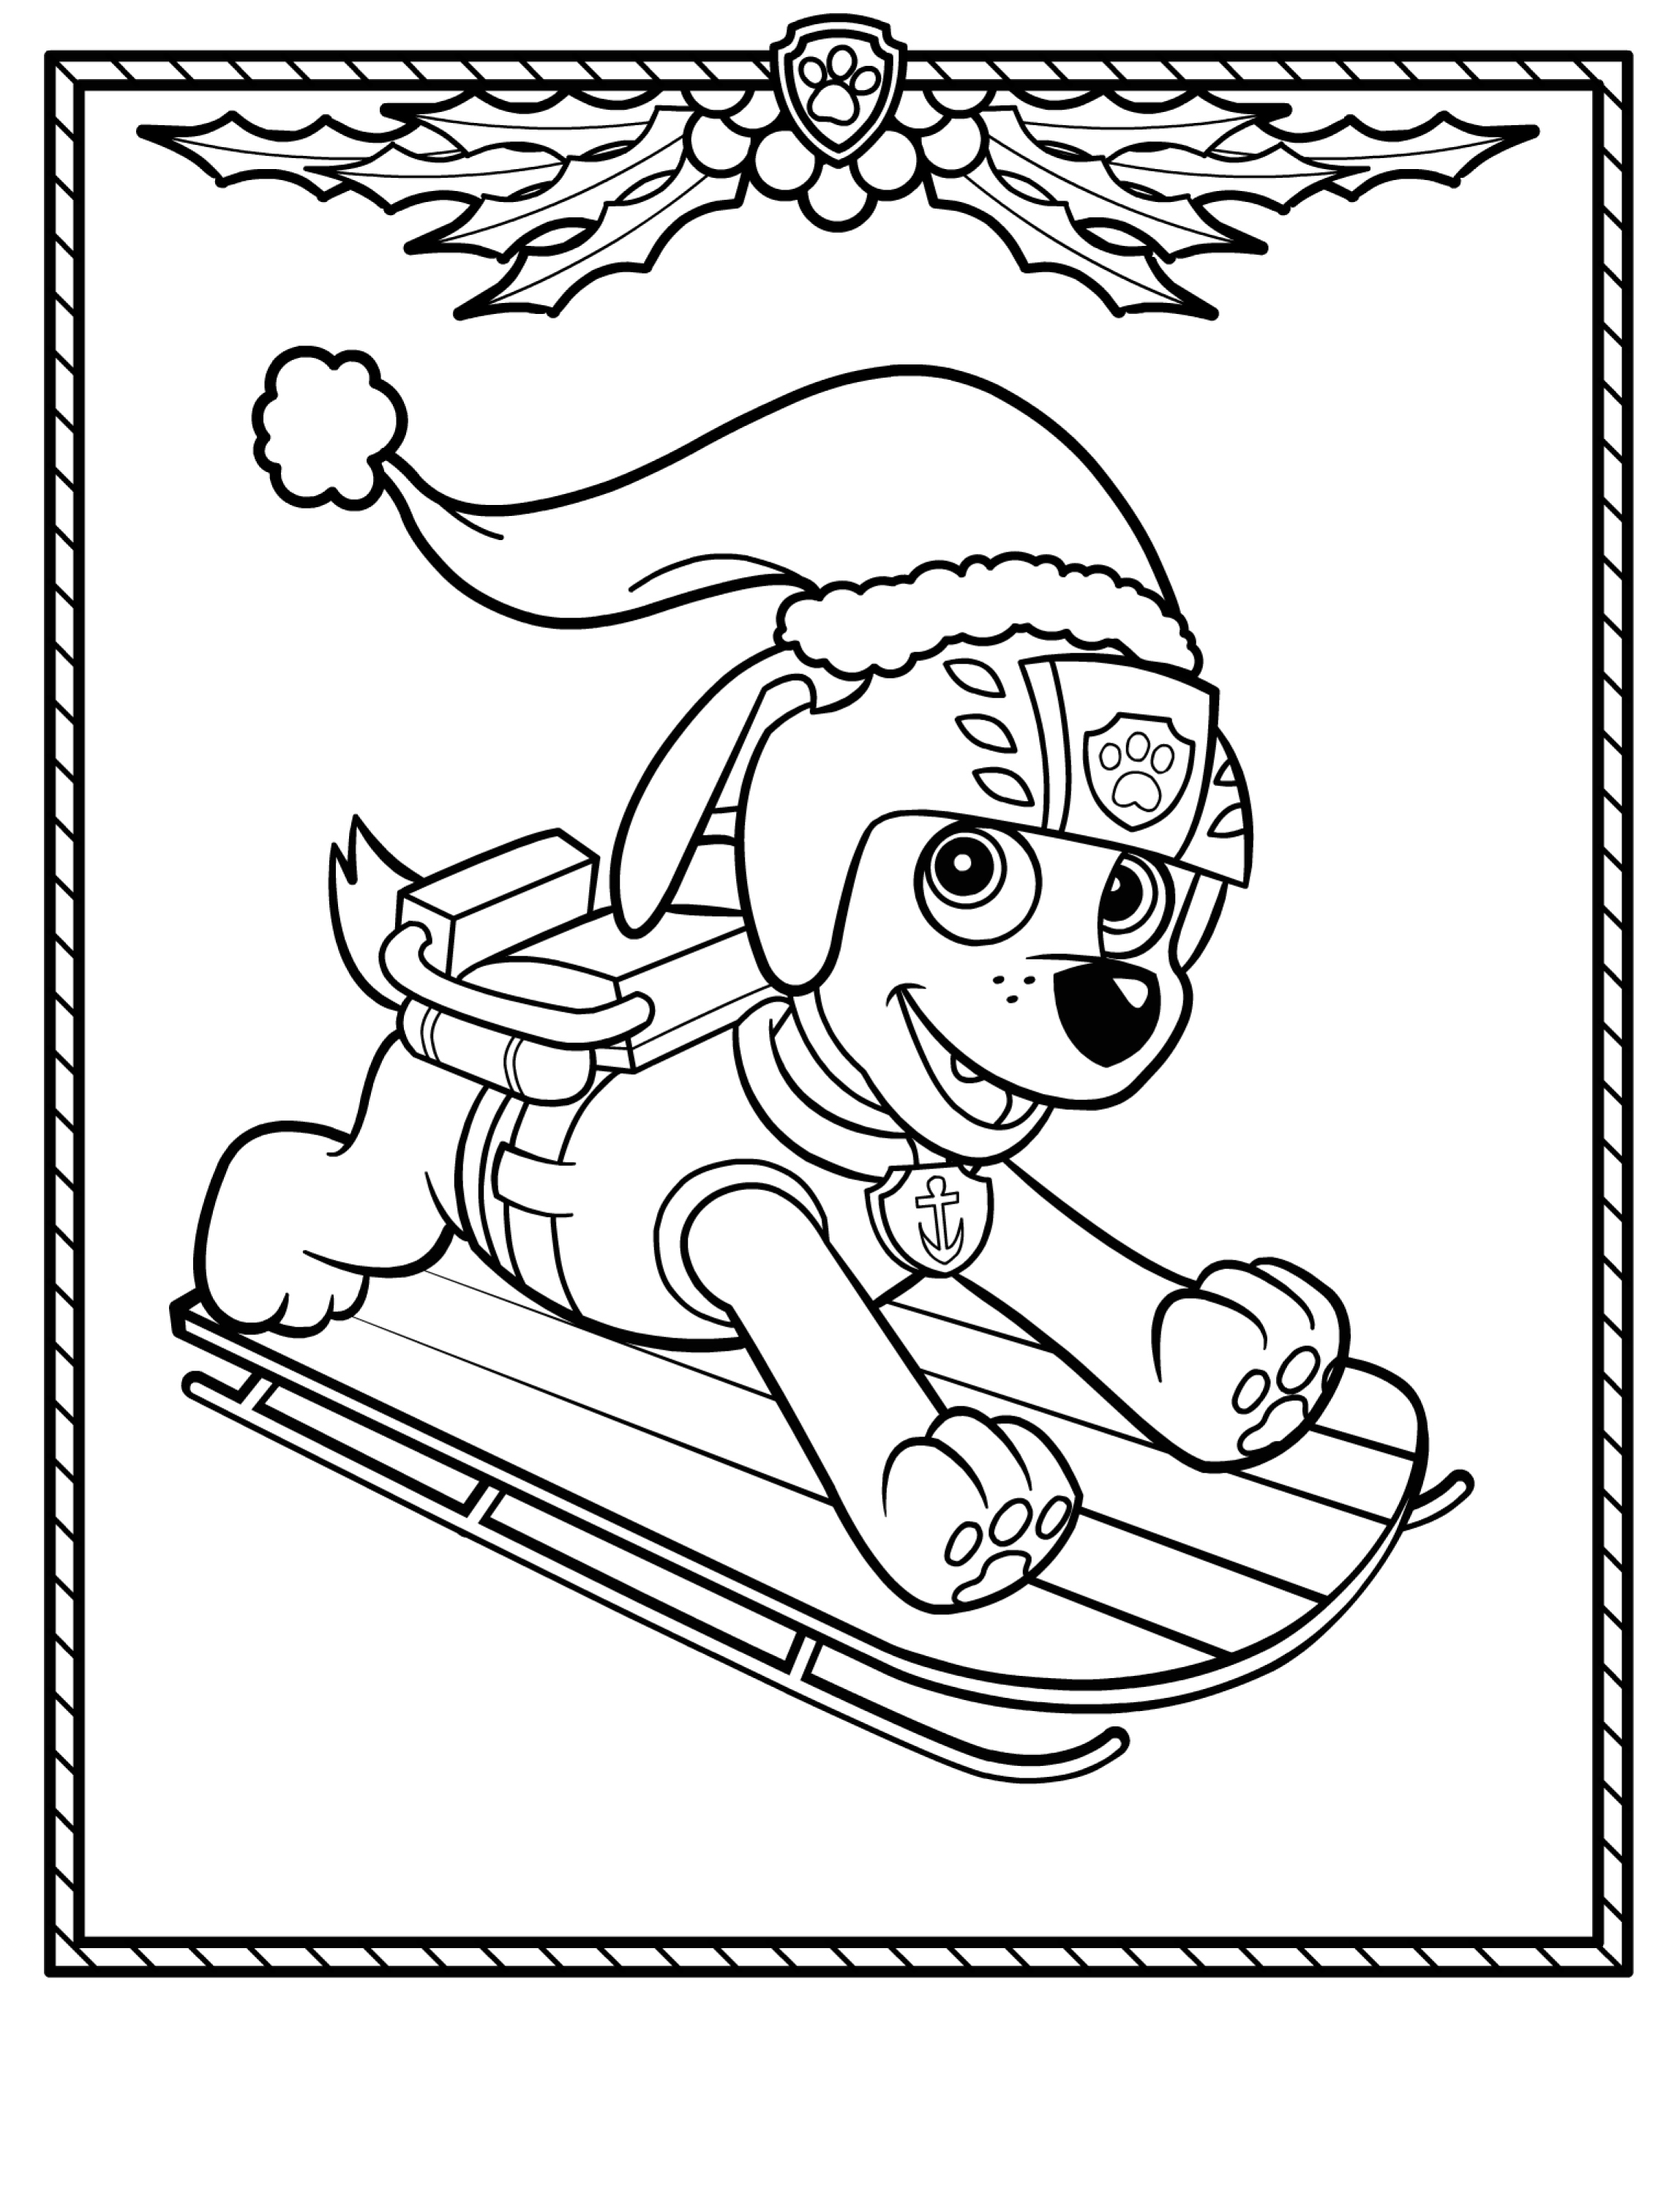 Paw Patrol Coloring Pages FREE Printable 41